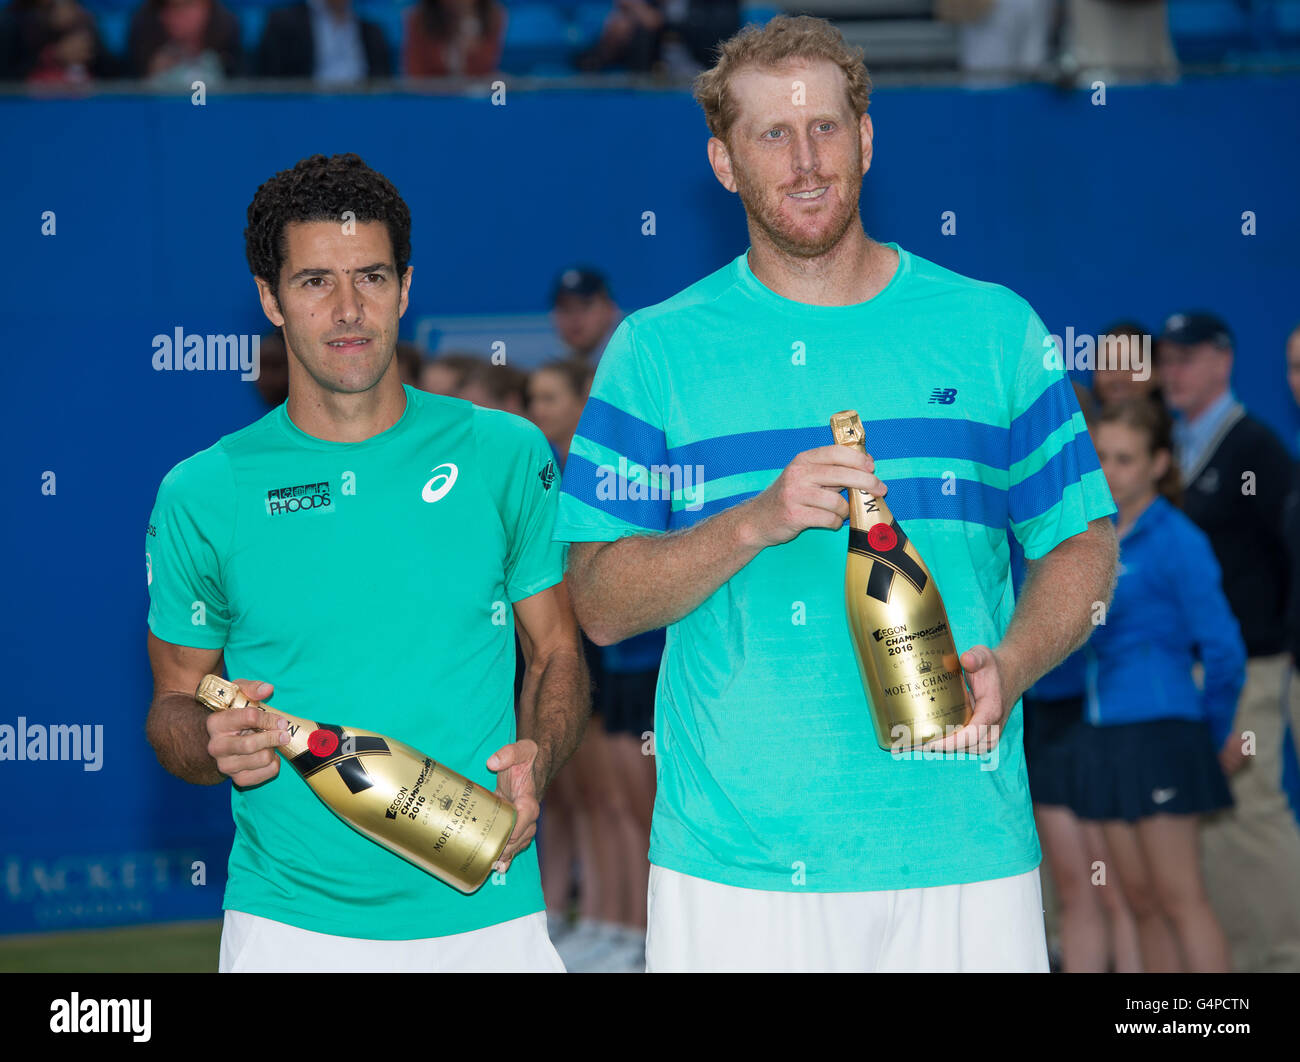 London, UK. 19th June, 2016. Runners-up Chris Guccione (R) of Australia and Andre Sa of Brazil pose for photos during the victory ceremony for the Men's Doubles final with Nicolas Mahut and Pierre-Hugues Herbert of France on day seven of the ATP-500 Aegon Championships at the Queen's Club in London, Britain on June 19, 2016. © Jon Buckle/Xinhua/Alamy Live News Stock Photo